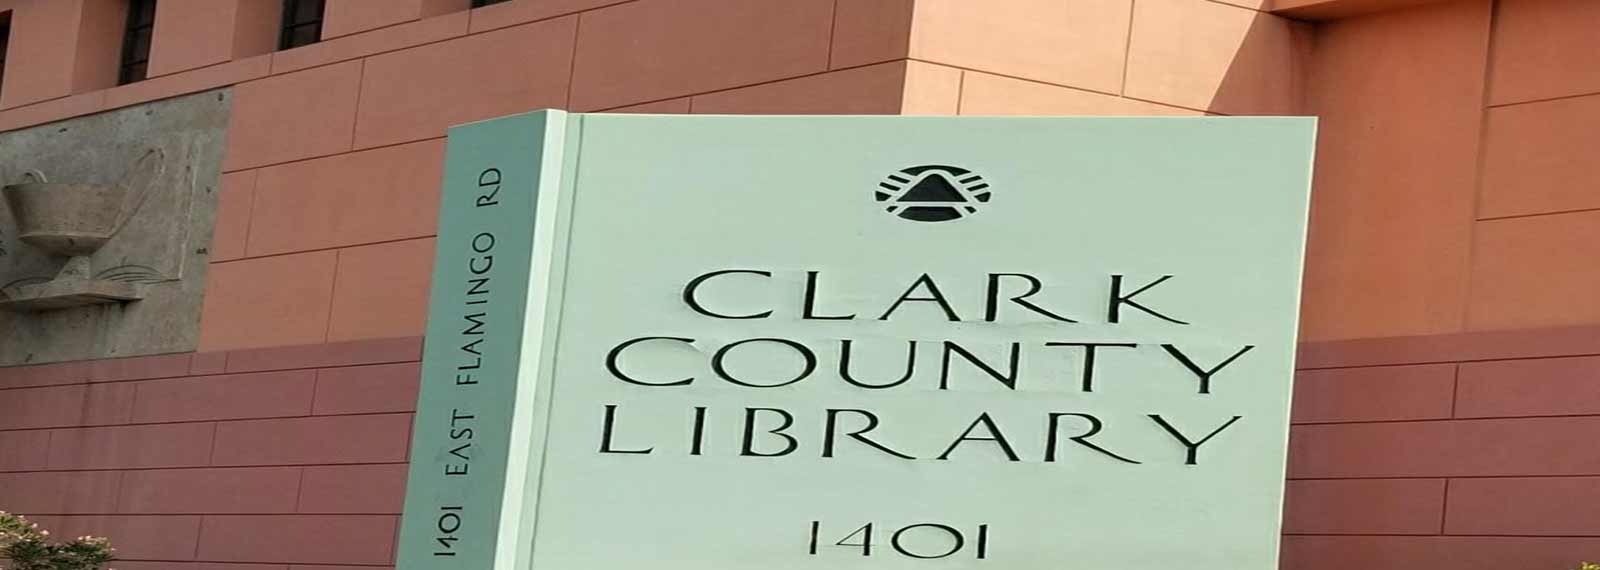 Clark County Library building.